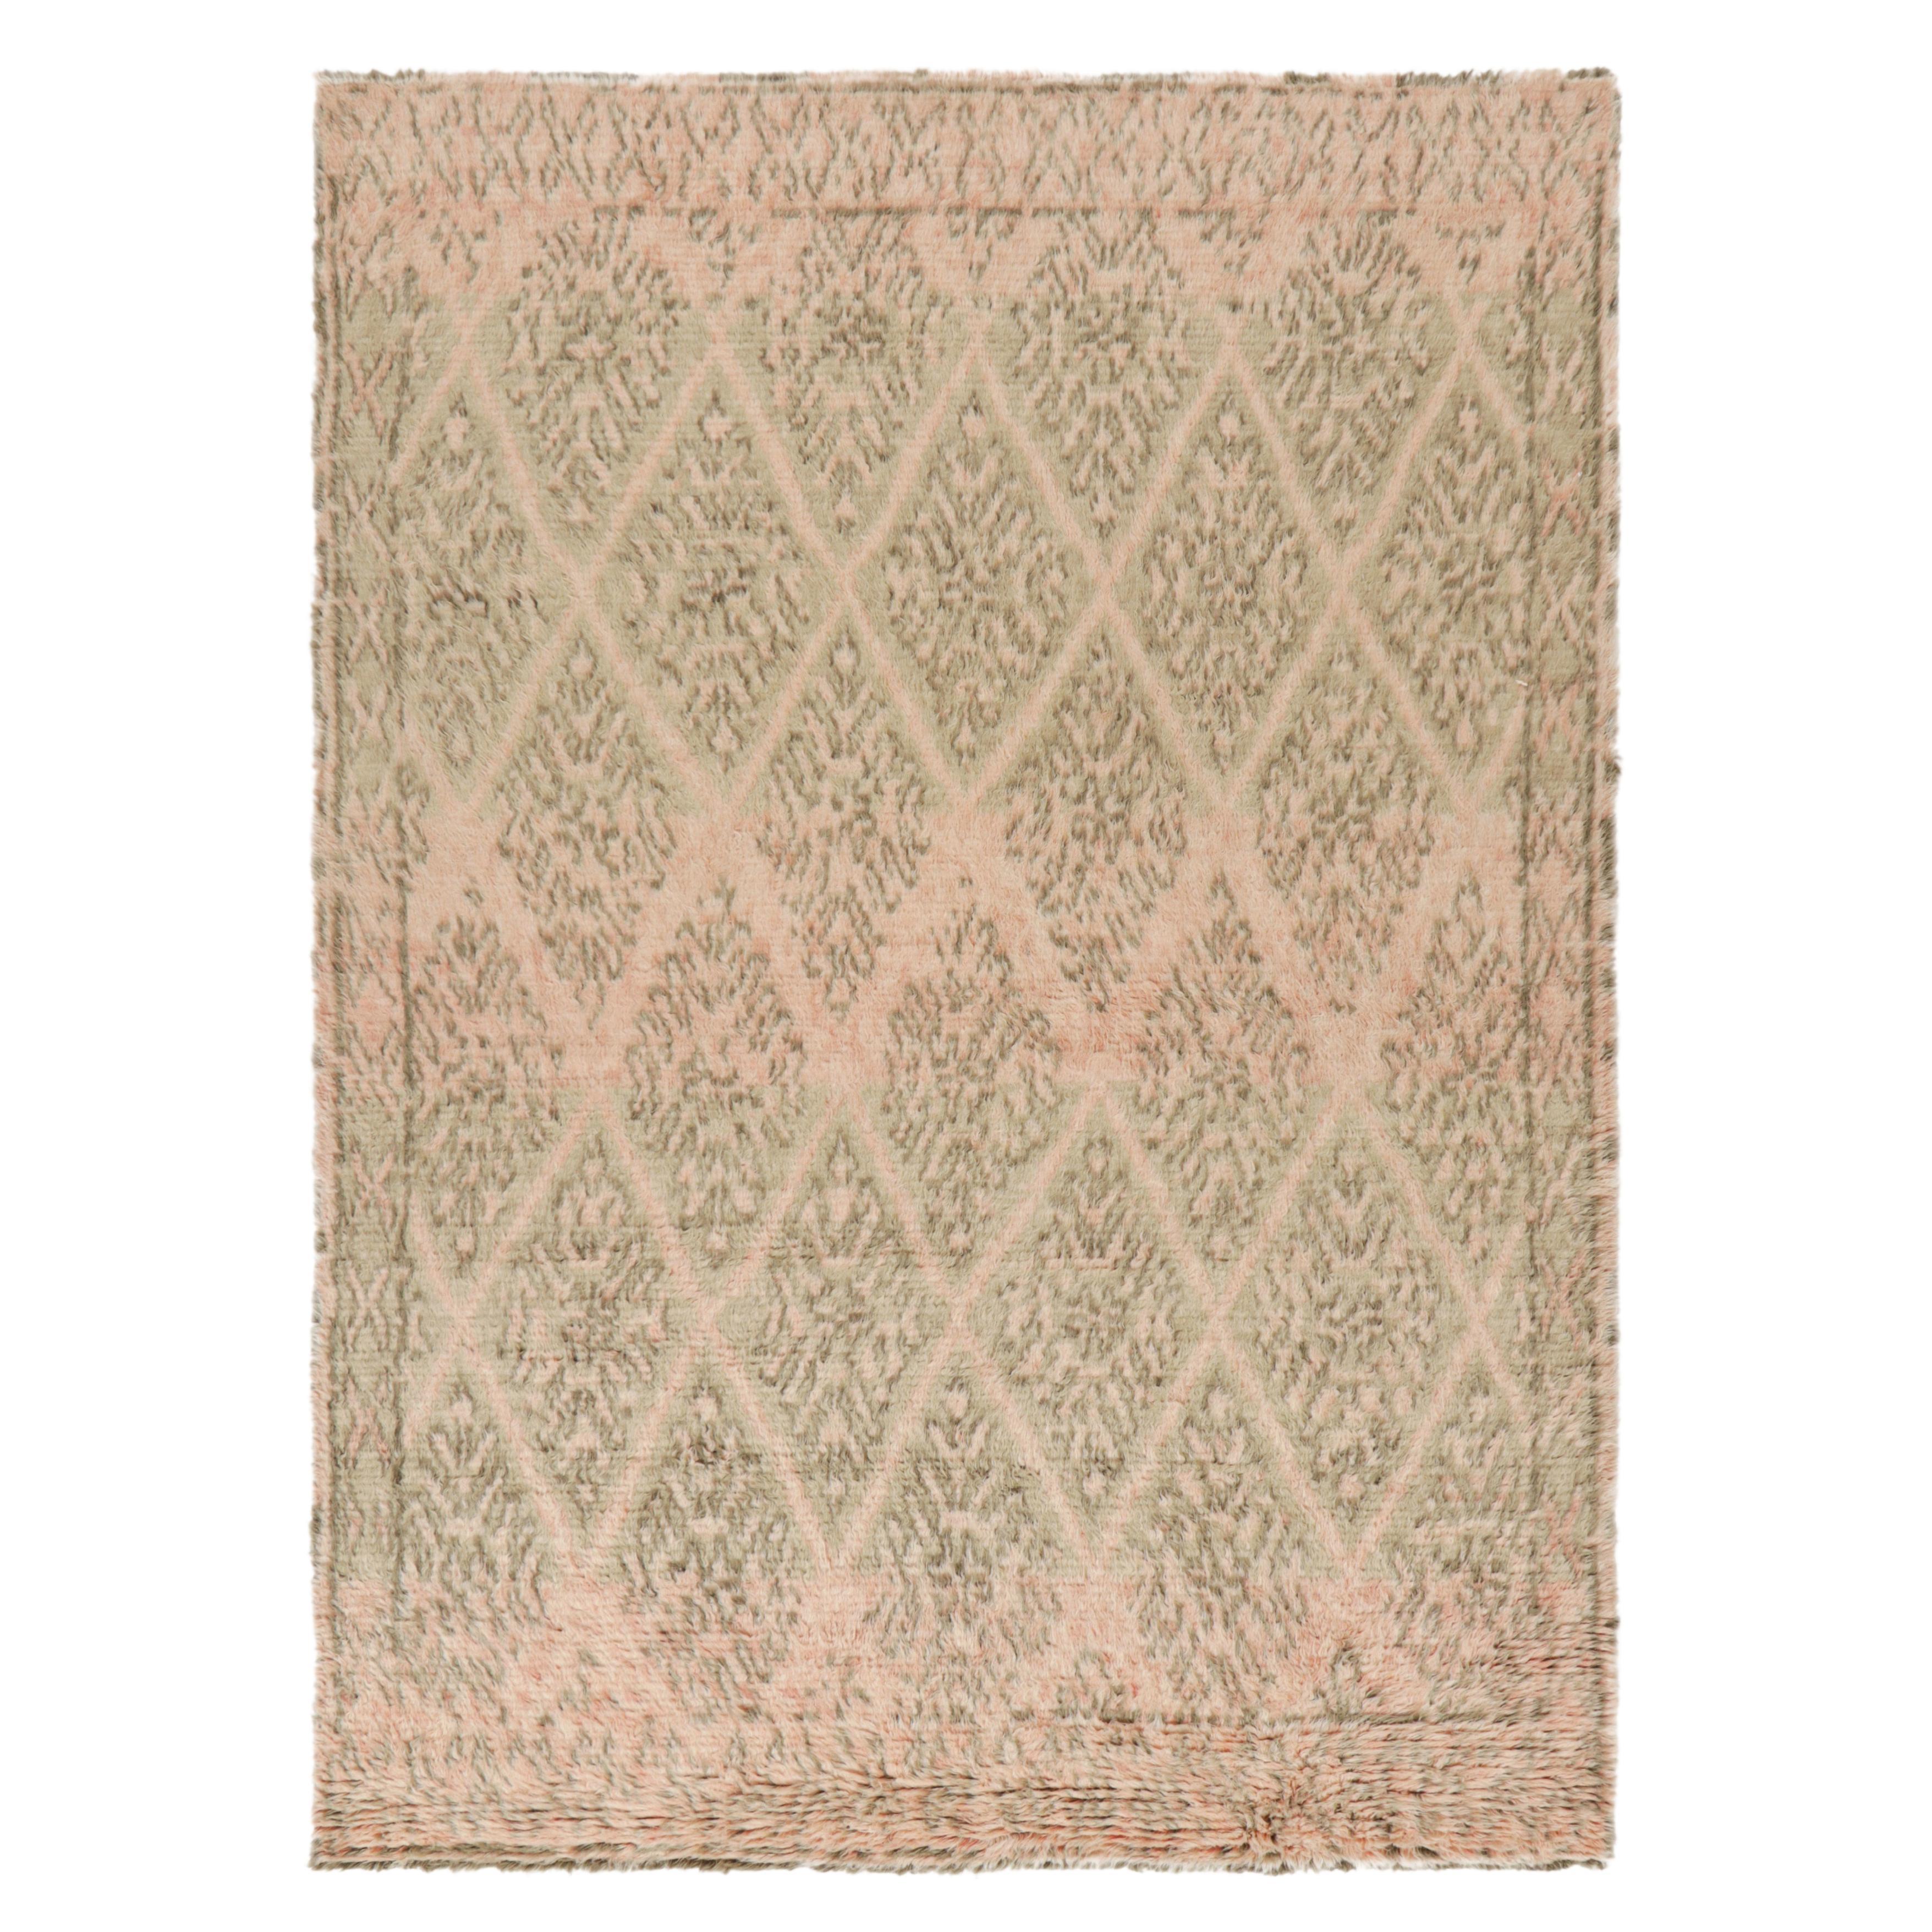 Rug & Kilim’s Moroccan Style Rug with Green and Pink Geometric Patterns